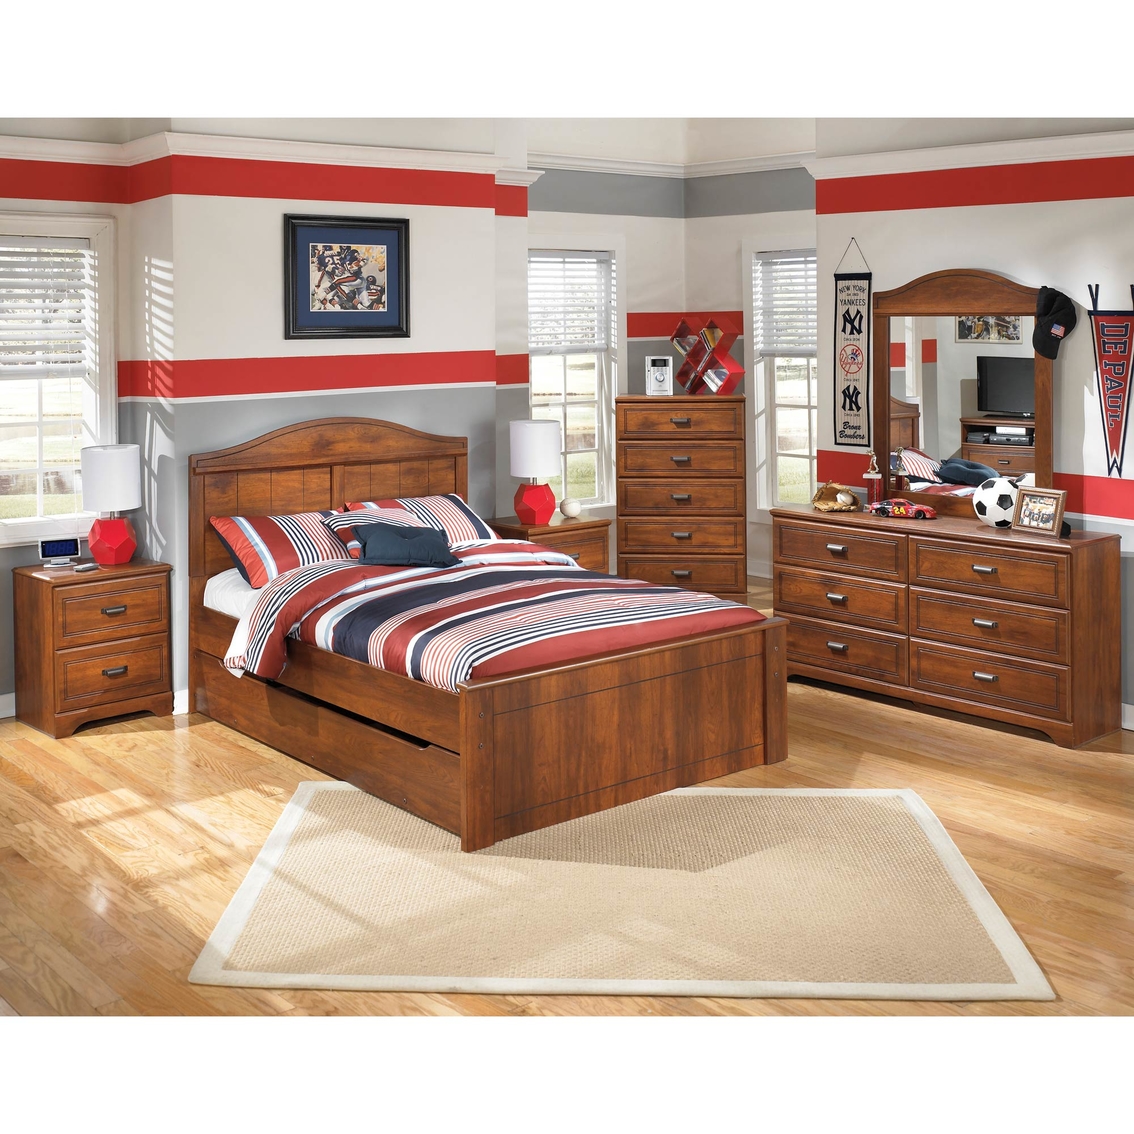 Ashley Barchan Trundle Bed - Image 4 of 4